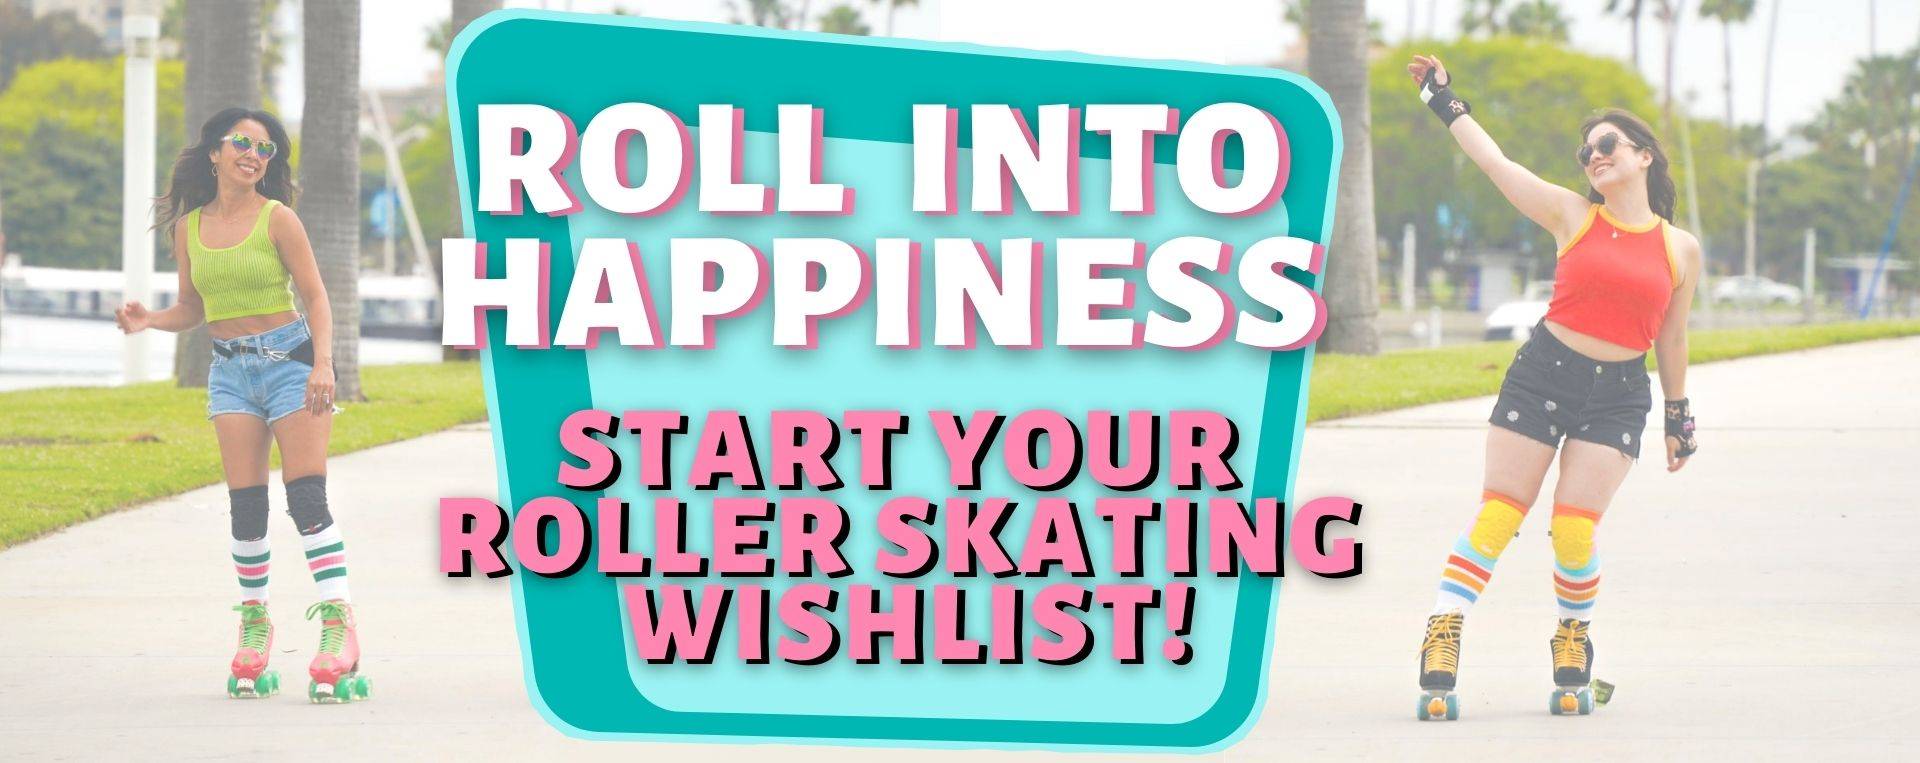 Roll into happiness. Start your roller skating wishlist